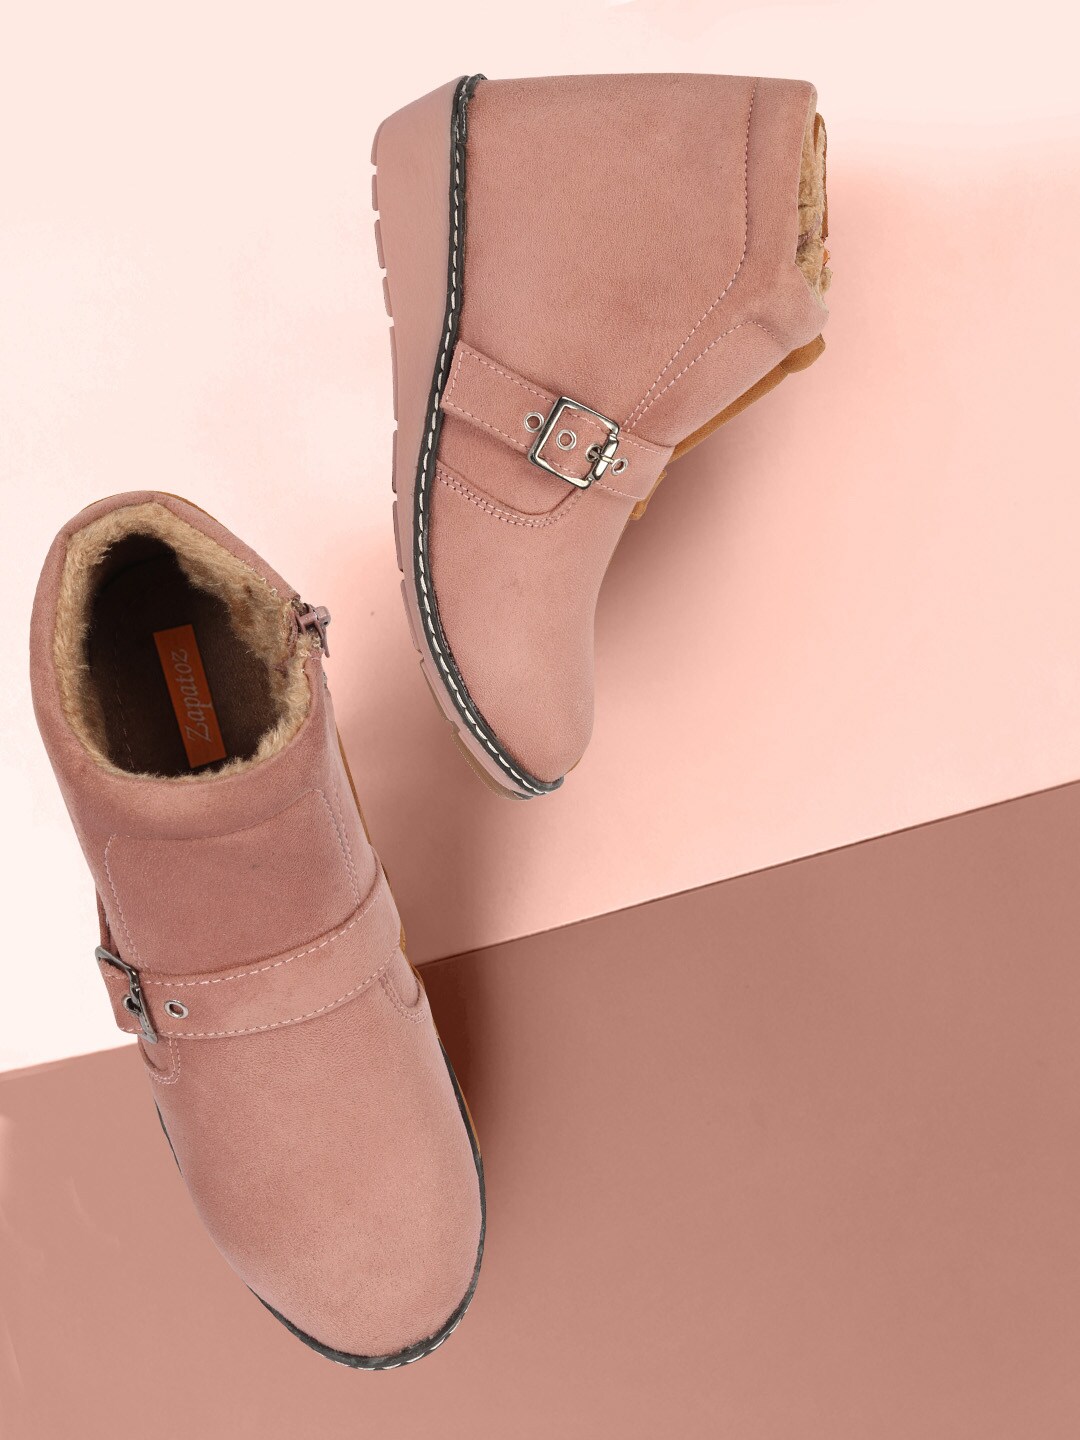 ZAPATOZ Women Pink Suede High-Top Flat Boots Price in India